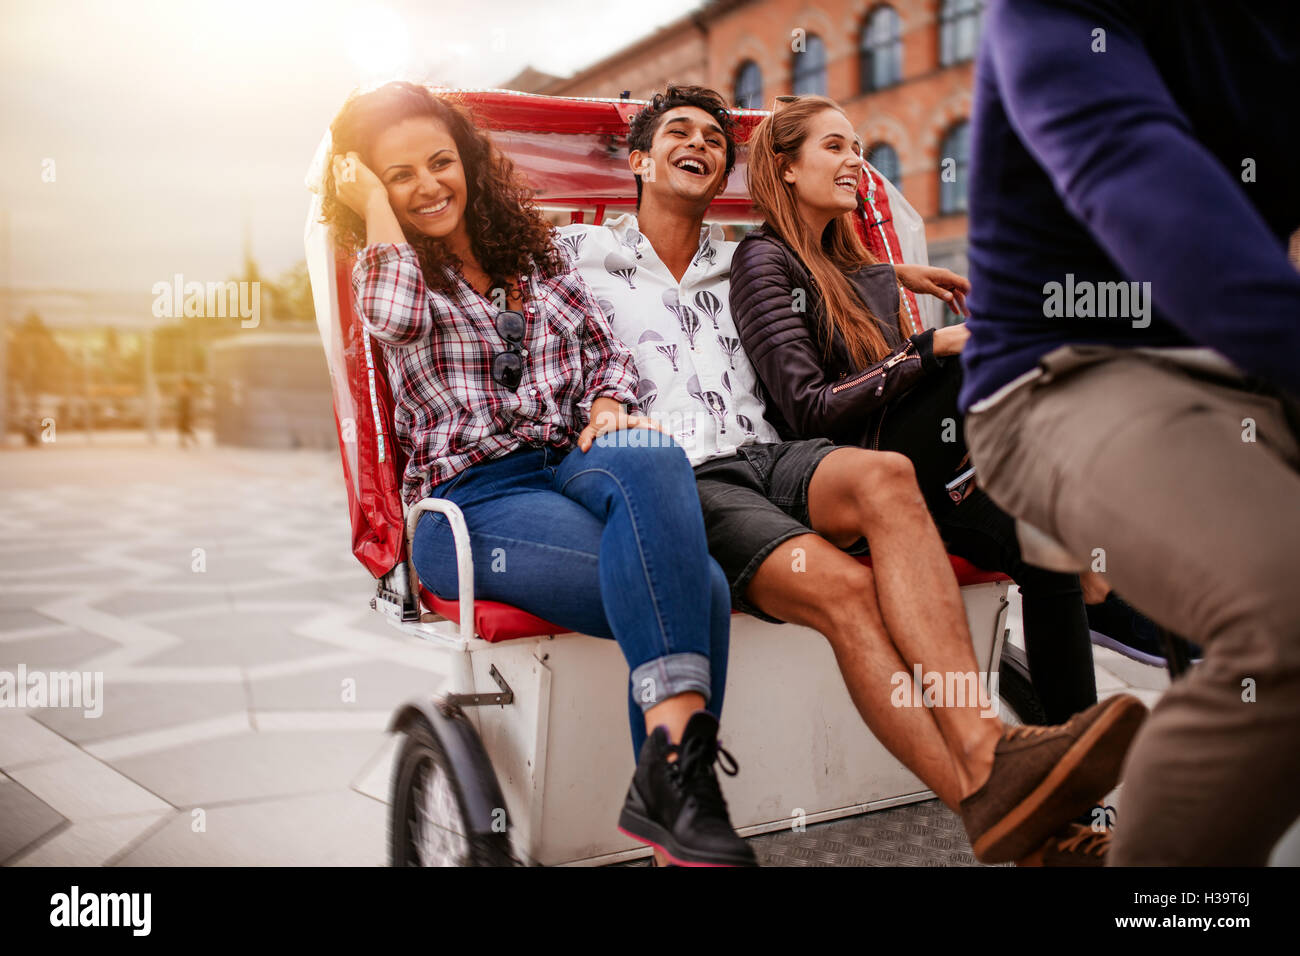 Teenage friends enjoying tricycle ride in the city. Teenagers riding on tricycle on road and smiling. Stock Photo